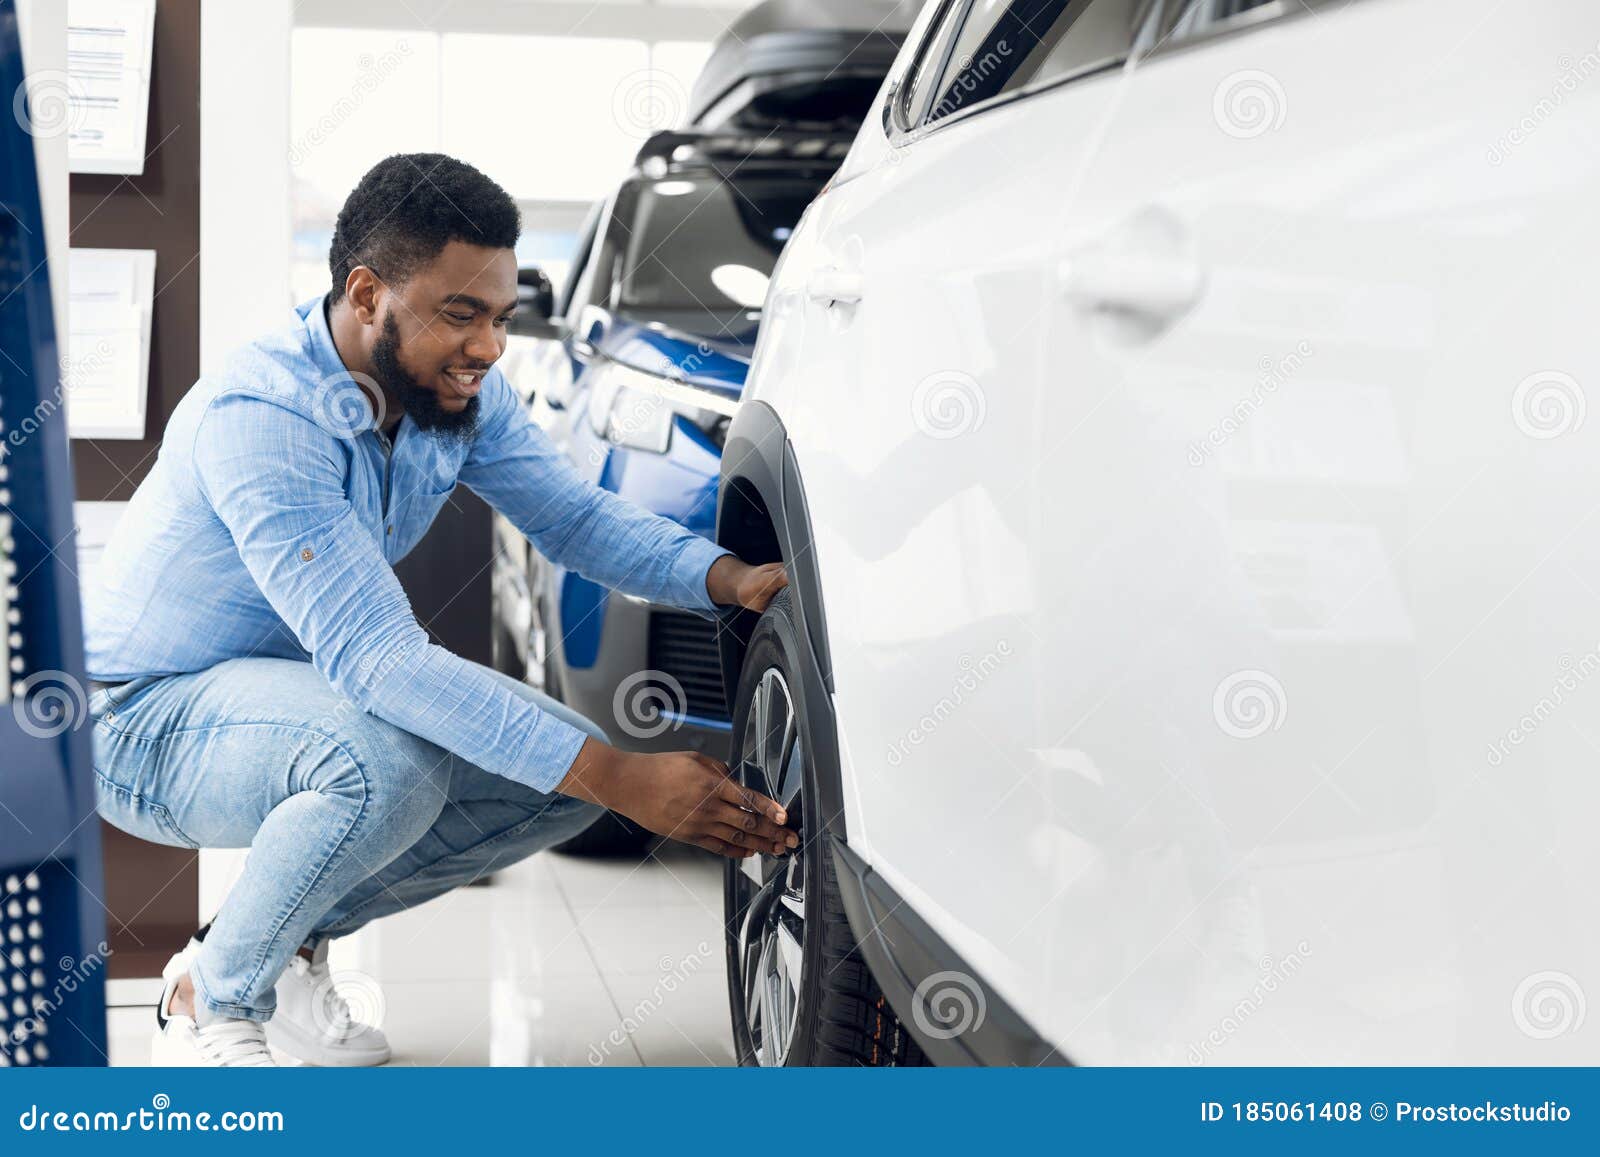 black guy checking car wheels and tyres in dealership showroom